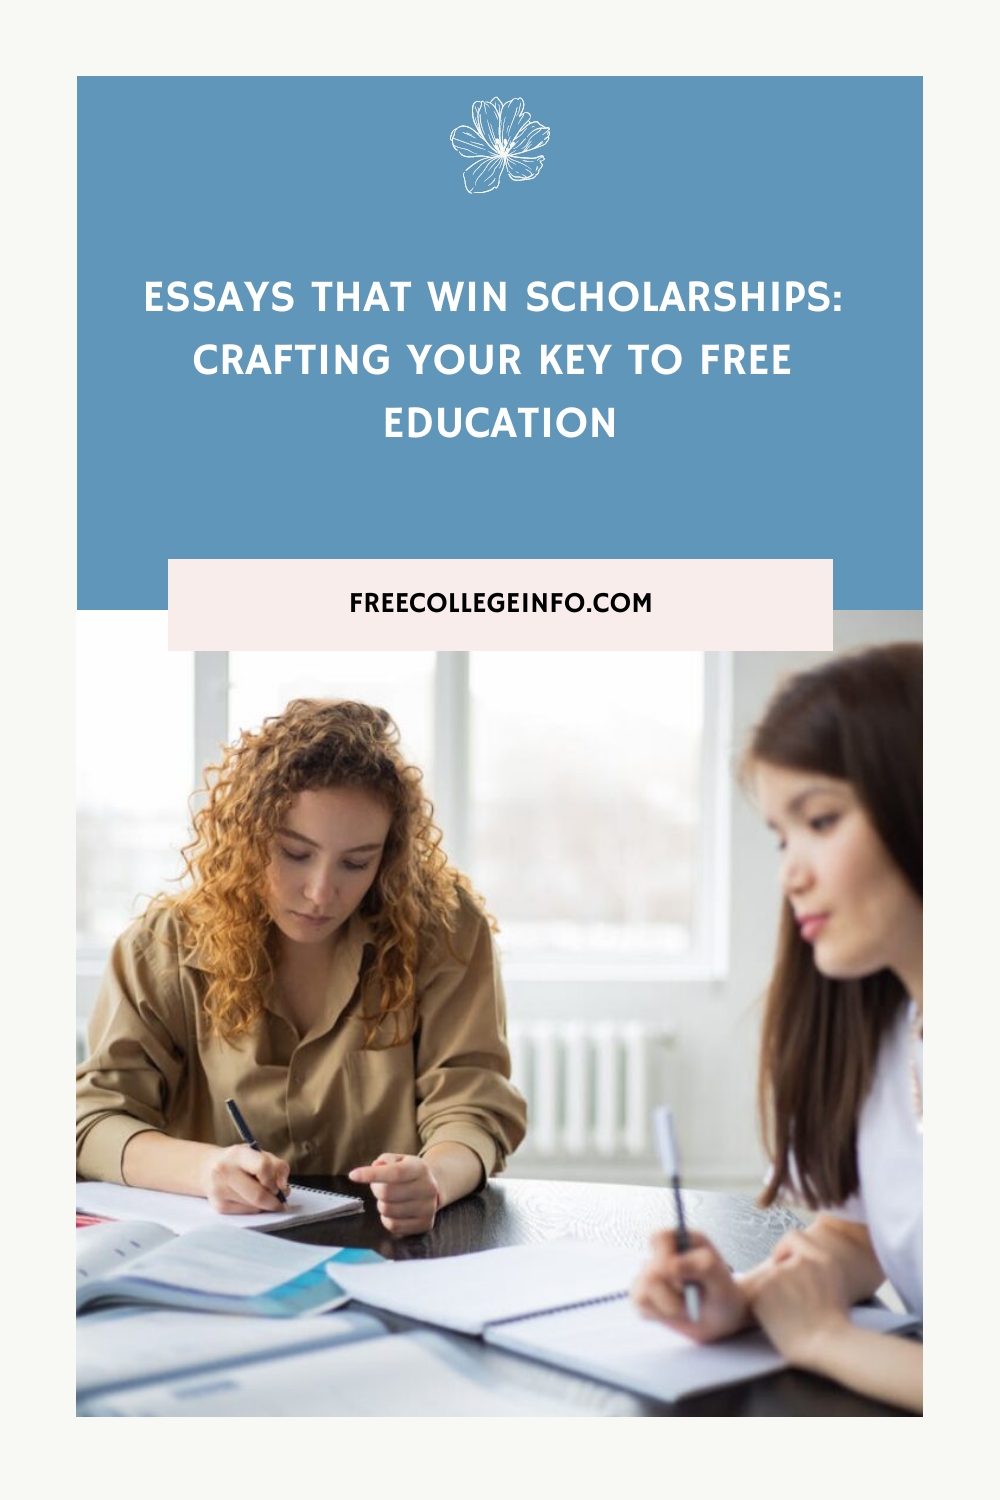 Essays That Win Scholarships: Crafting Your Key to Free Education